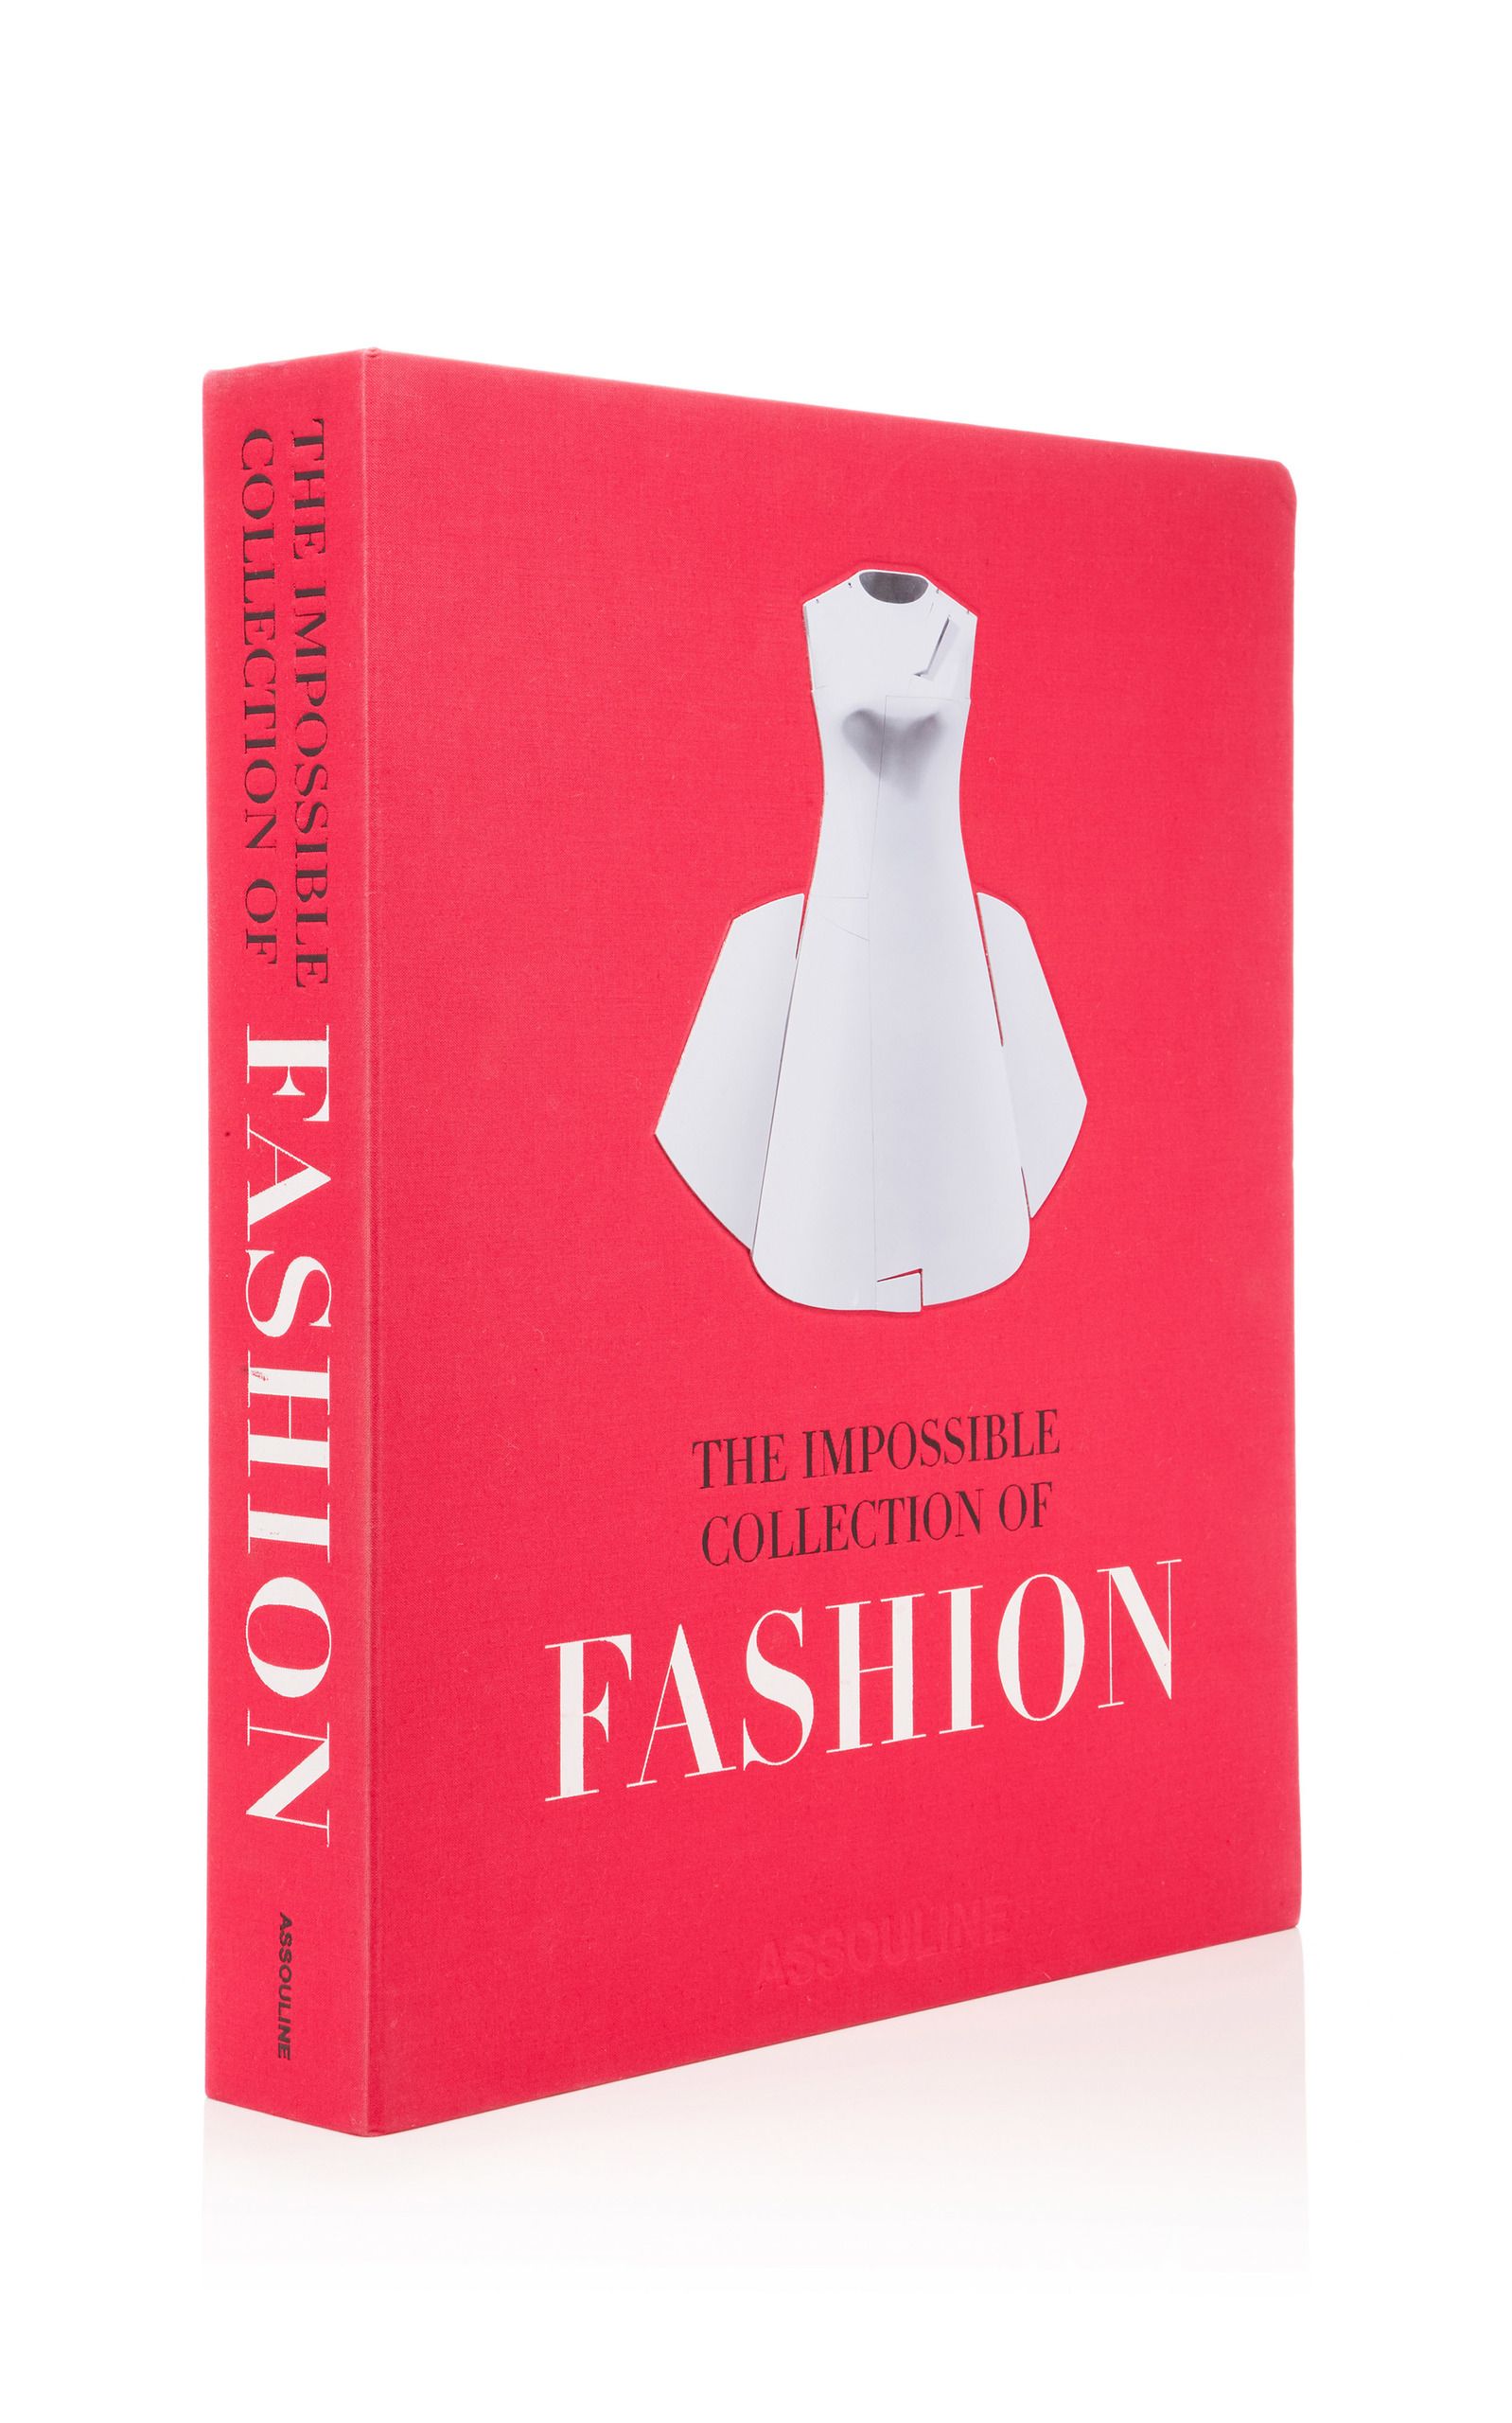 The Impossible Collection of Fashion Hardcover Book | Moda Operandi (Global)